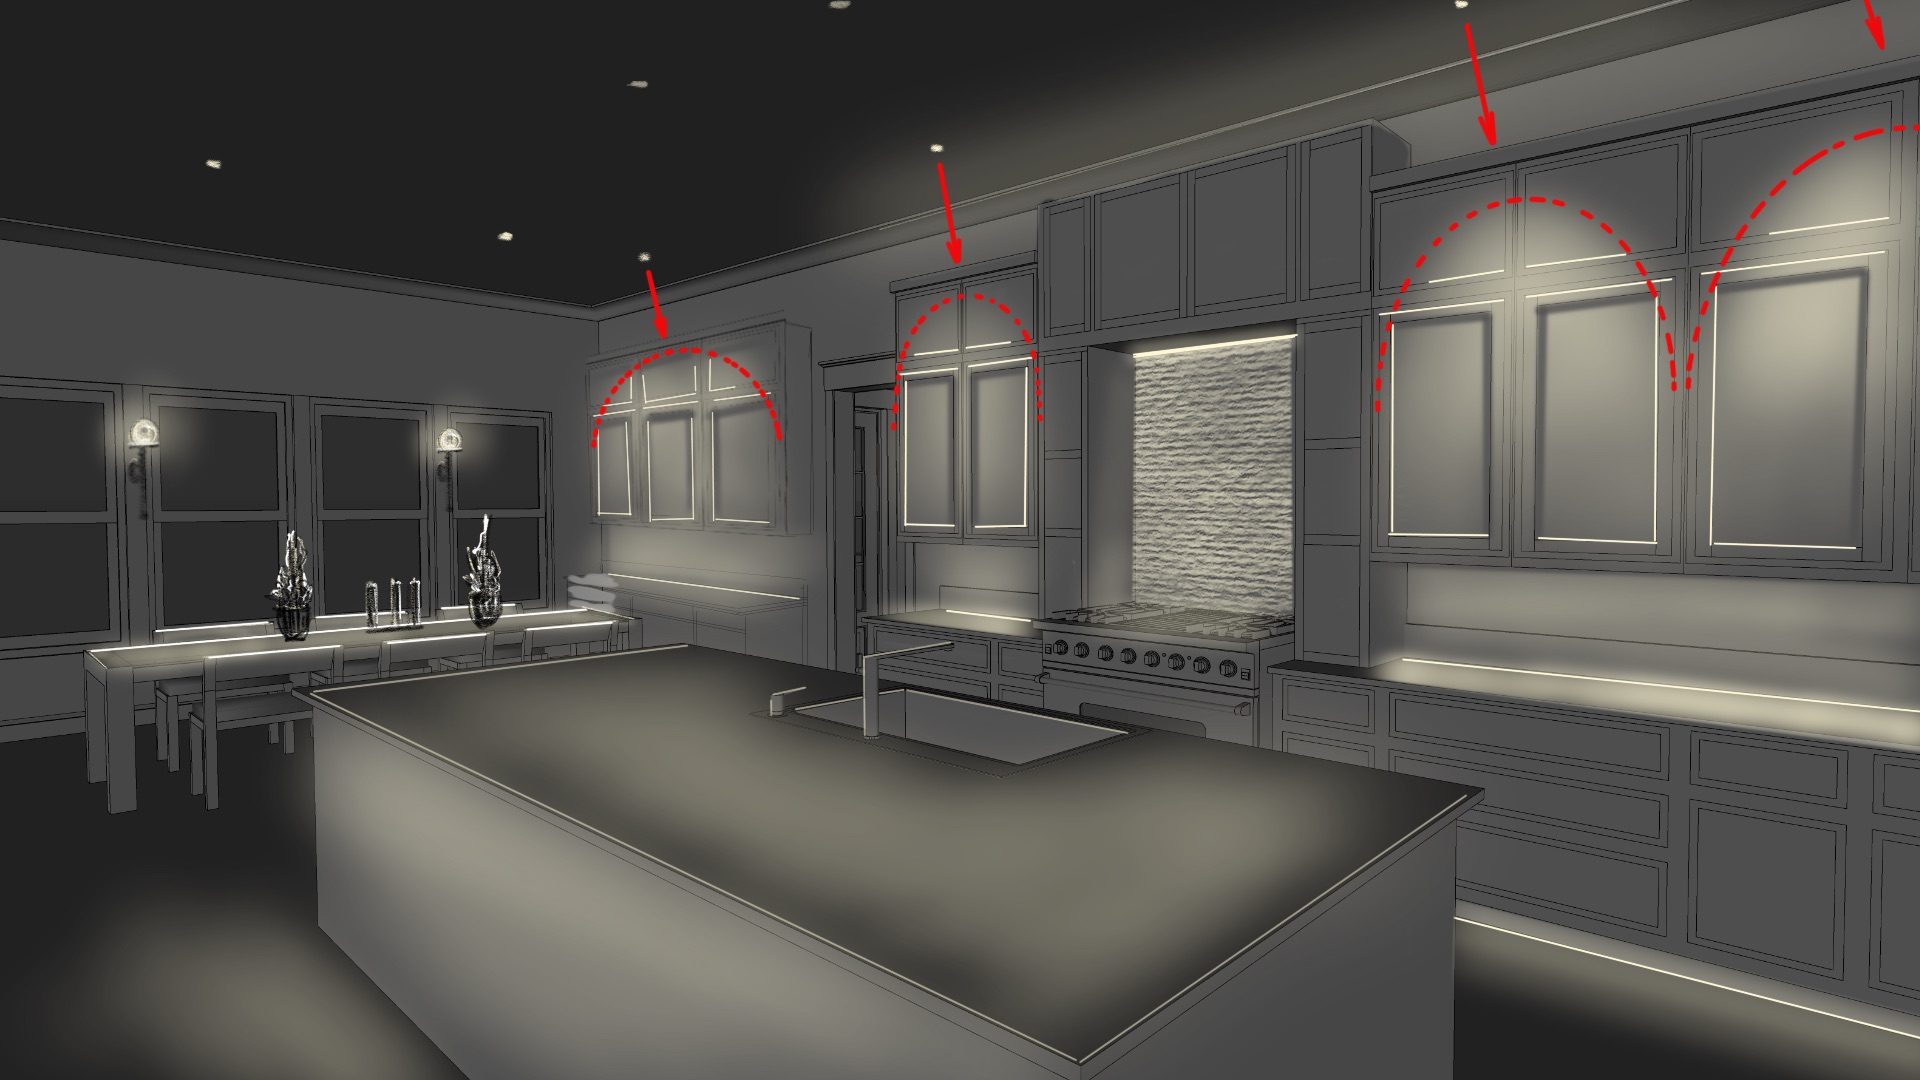 A CAD recreation of a kitchen with a big island, cabinets, and a dining table behind the island. The cabinets over the counter are highlighted with lights directed downwards, which are emphasized by red dotted lines and arrows pointing to the lighted area